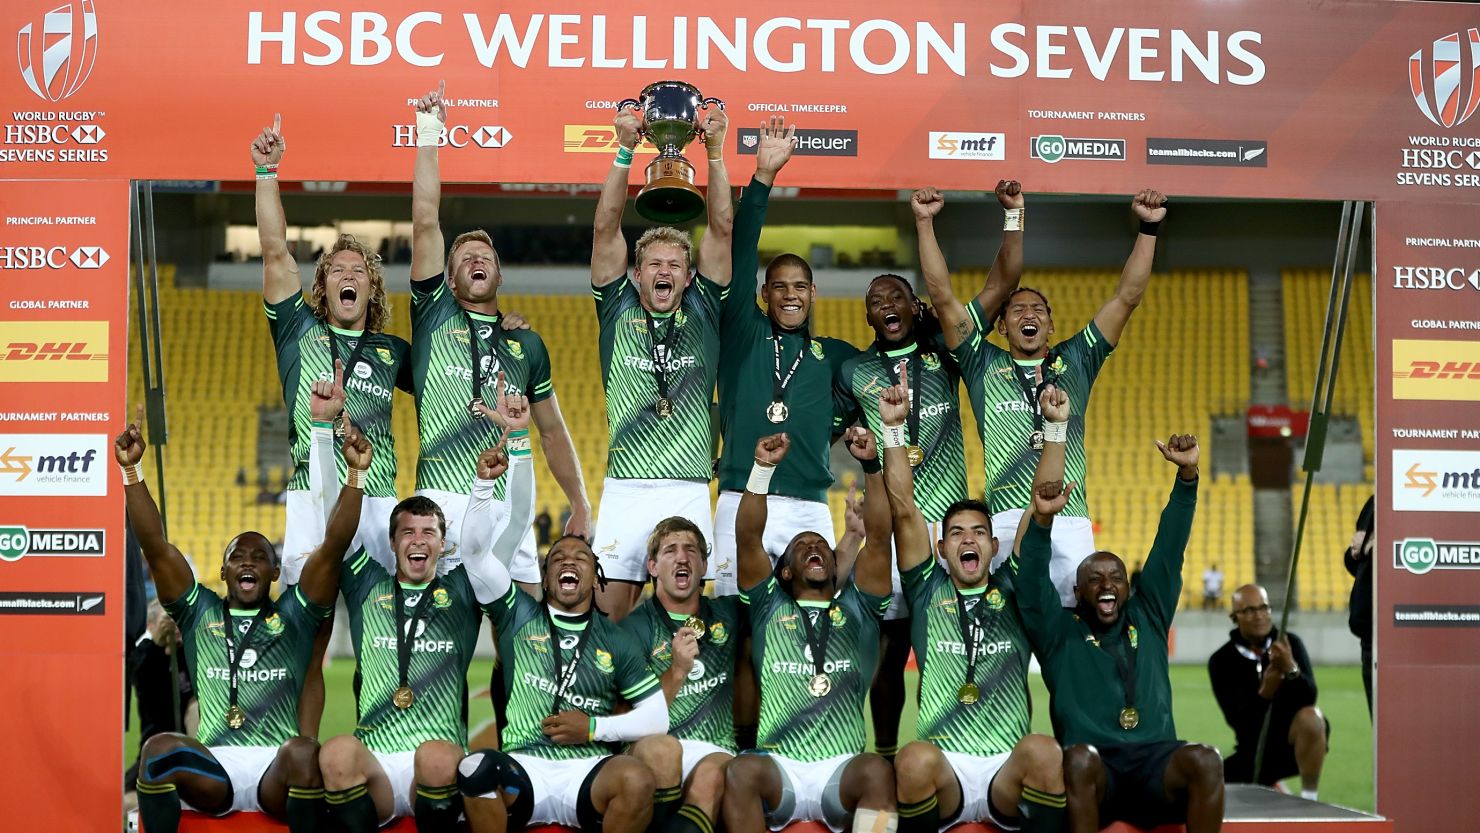 South Africa celebrates its victory over Fiji in the final of the Wellington Sevens at the Westpac Stadium.